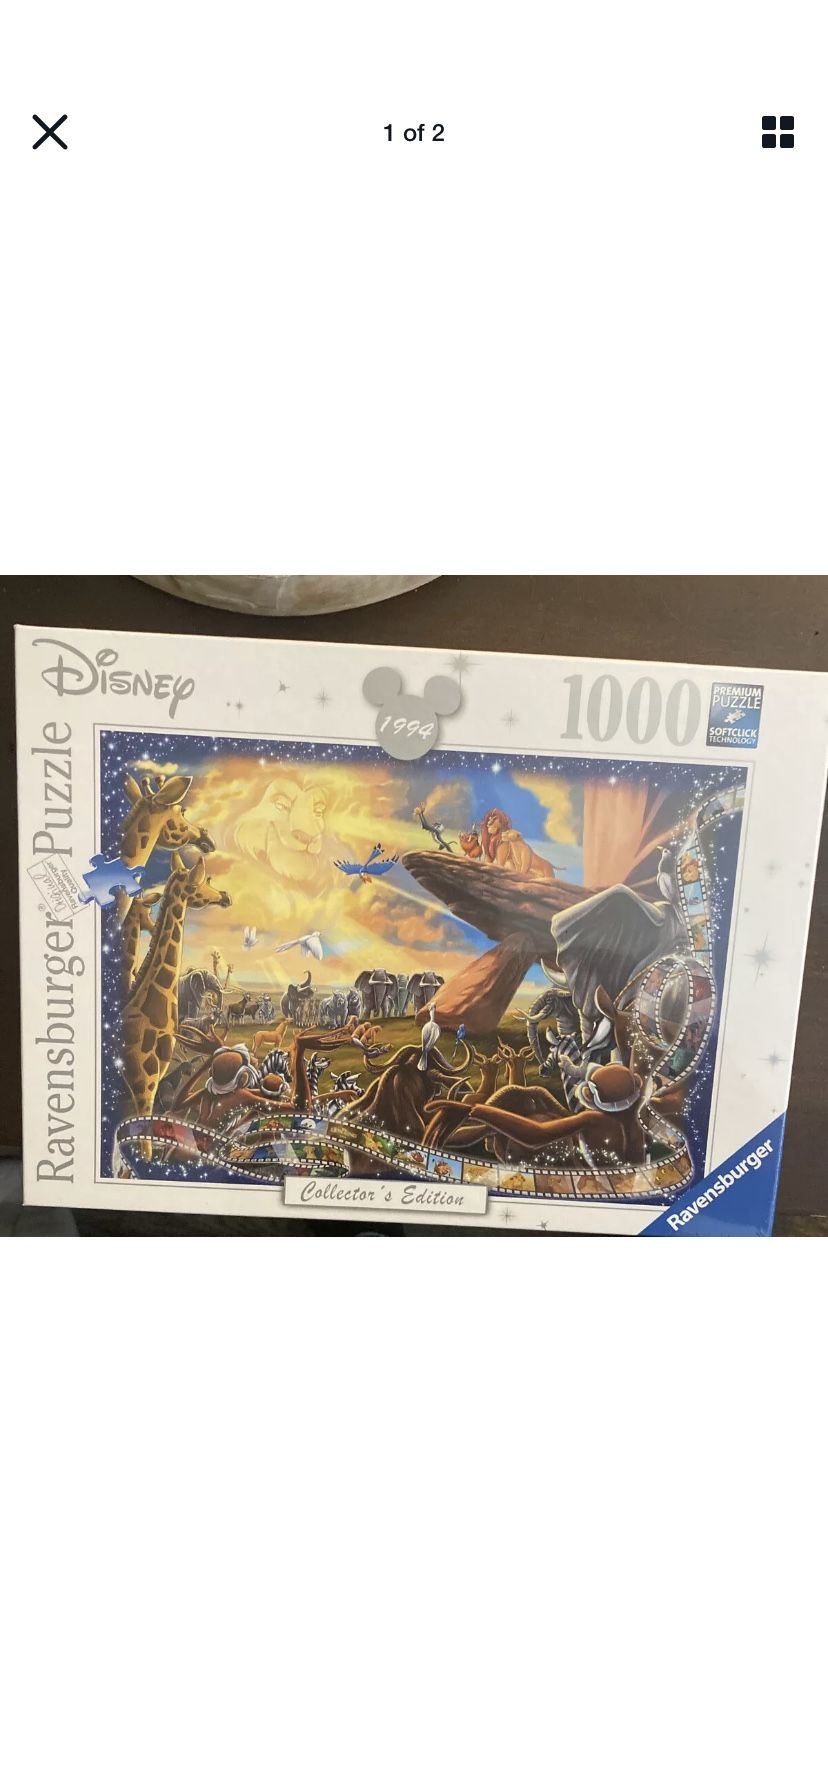 Ravensburger Disney Lion King Collector's Edition Jigsaw Puzzle - 1000 pieces